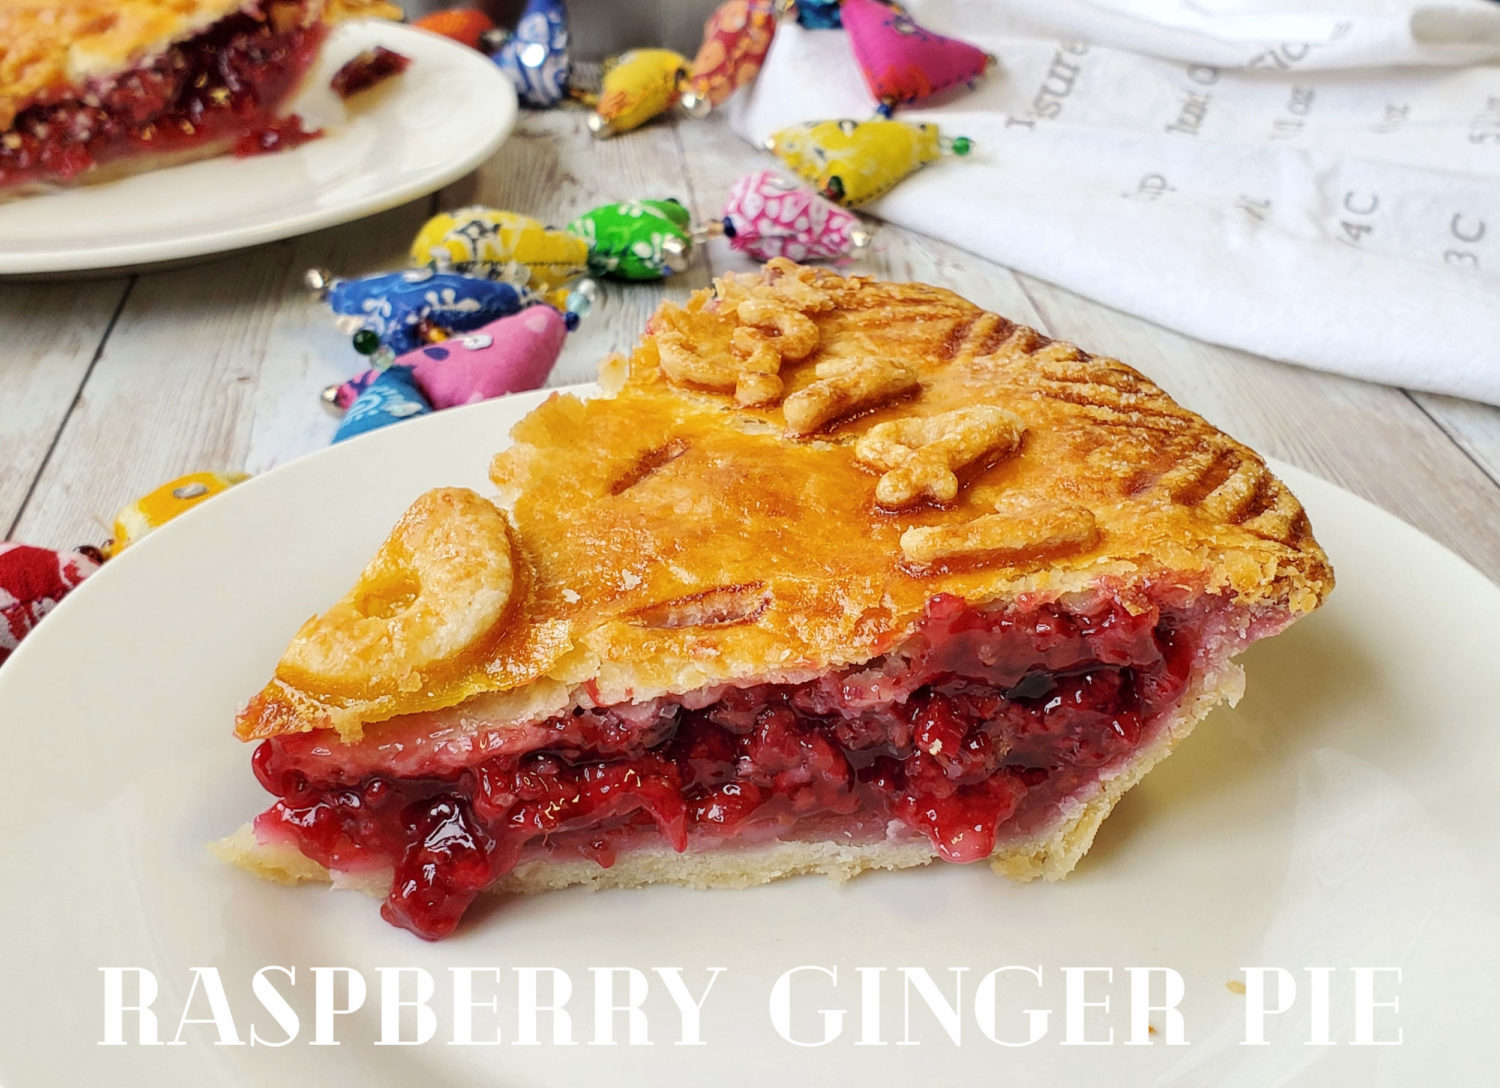 Raspberry Ginger Pie for Pi 3.14 Day (or any day): Fresh red raspberries and fresh ginger; a berry-licious pie baked in a super flaky crust!